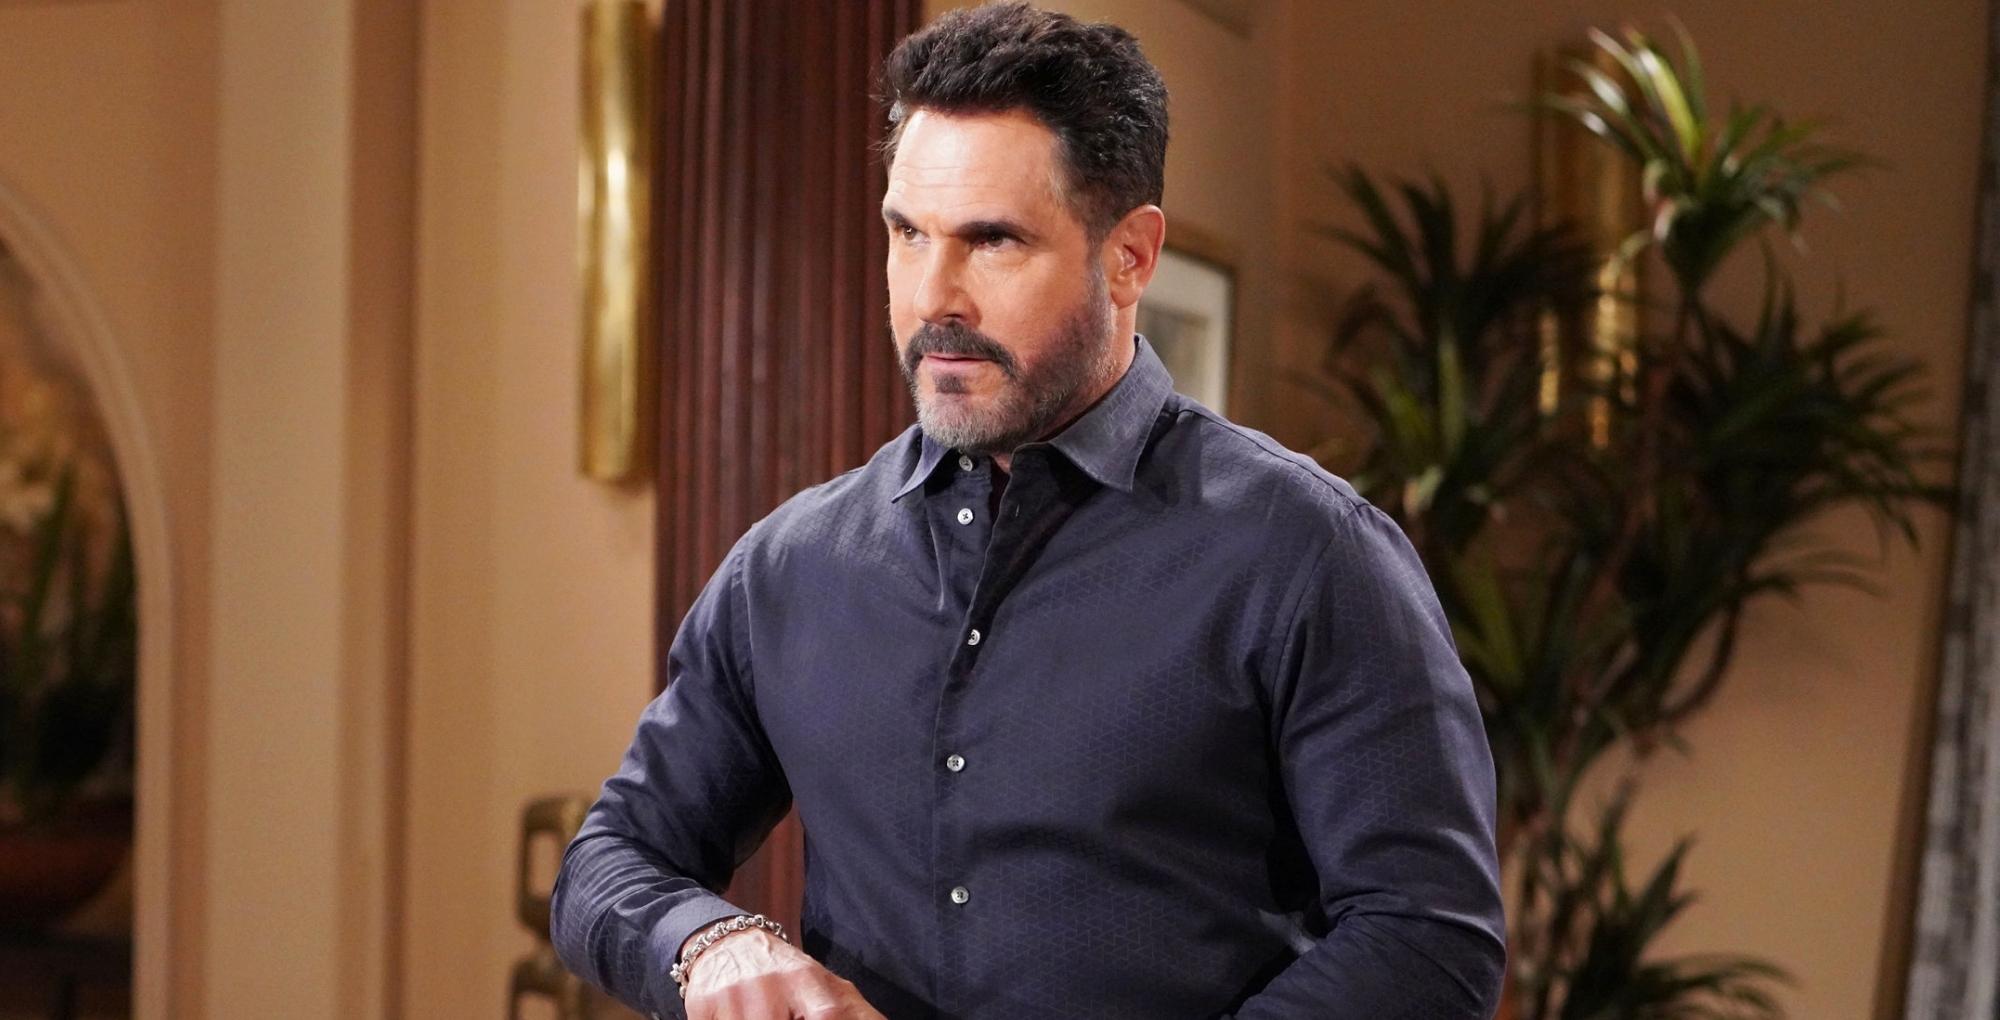 the bold and the beautiful spoilers for march 29, 2023 have bill scheming to make his plan work